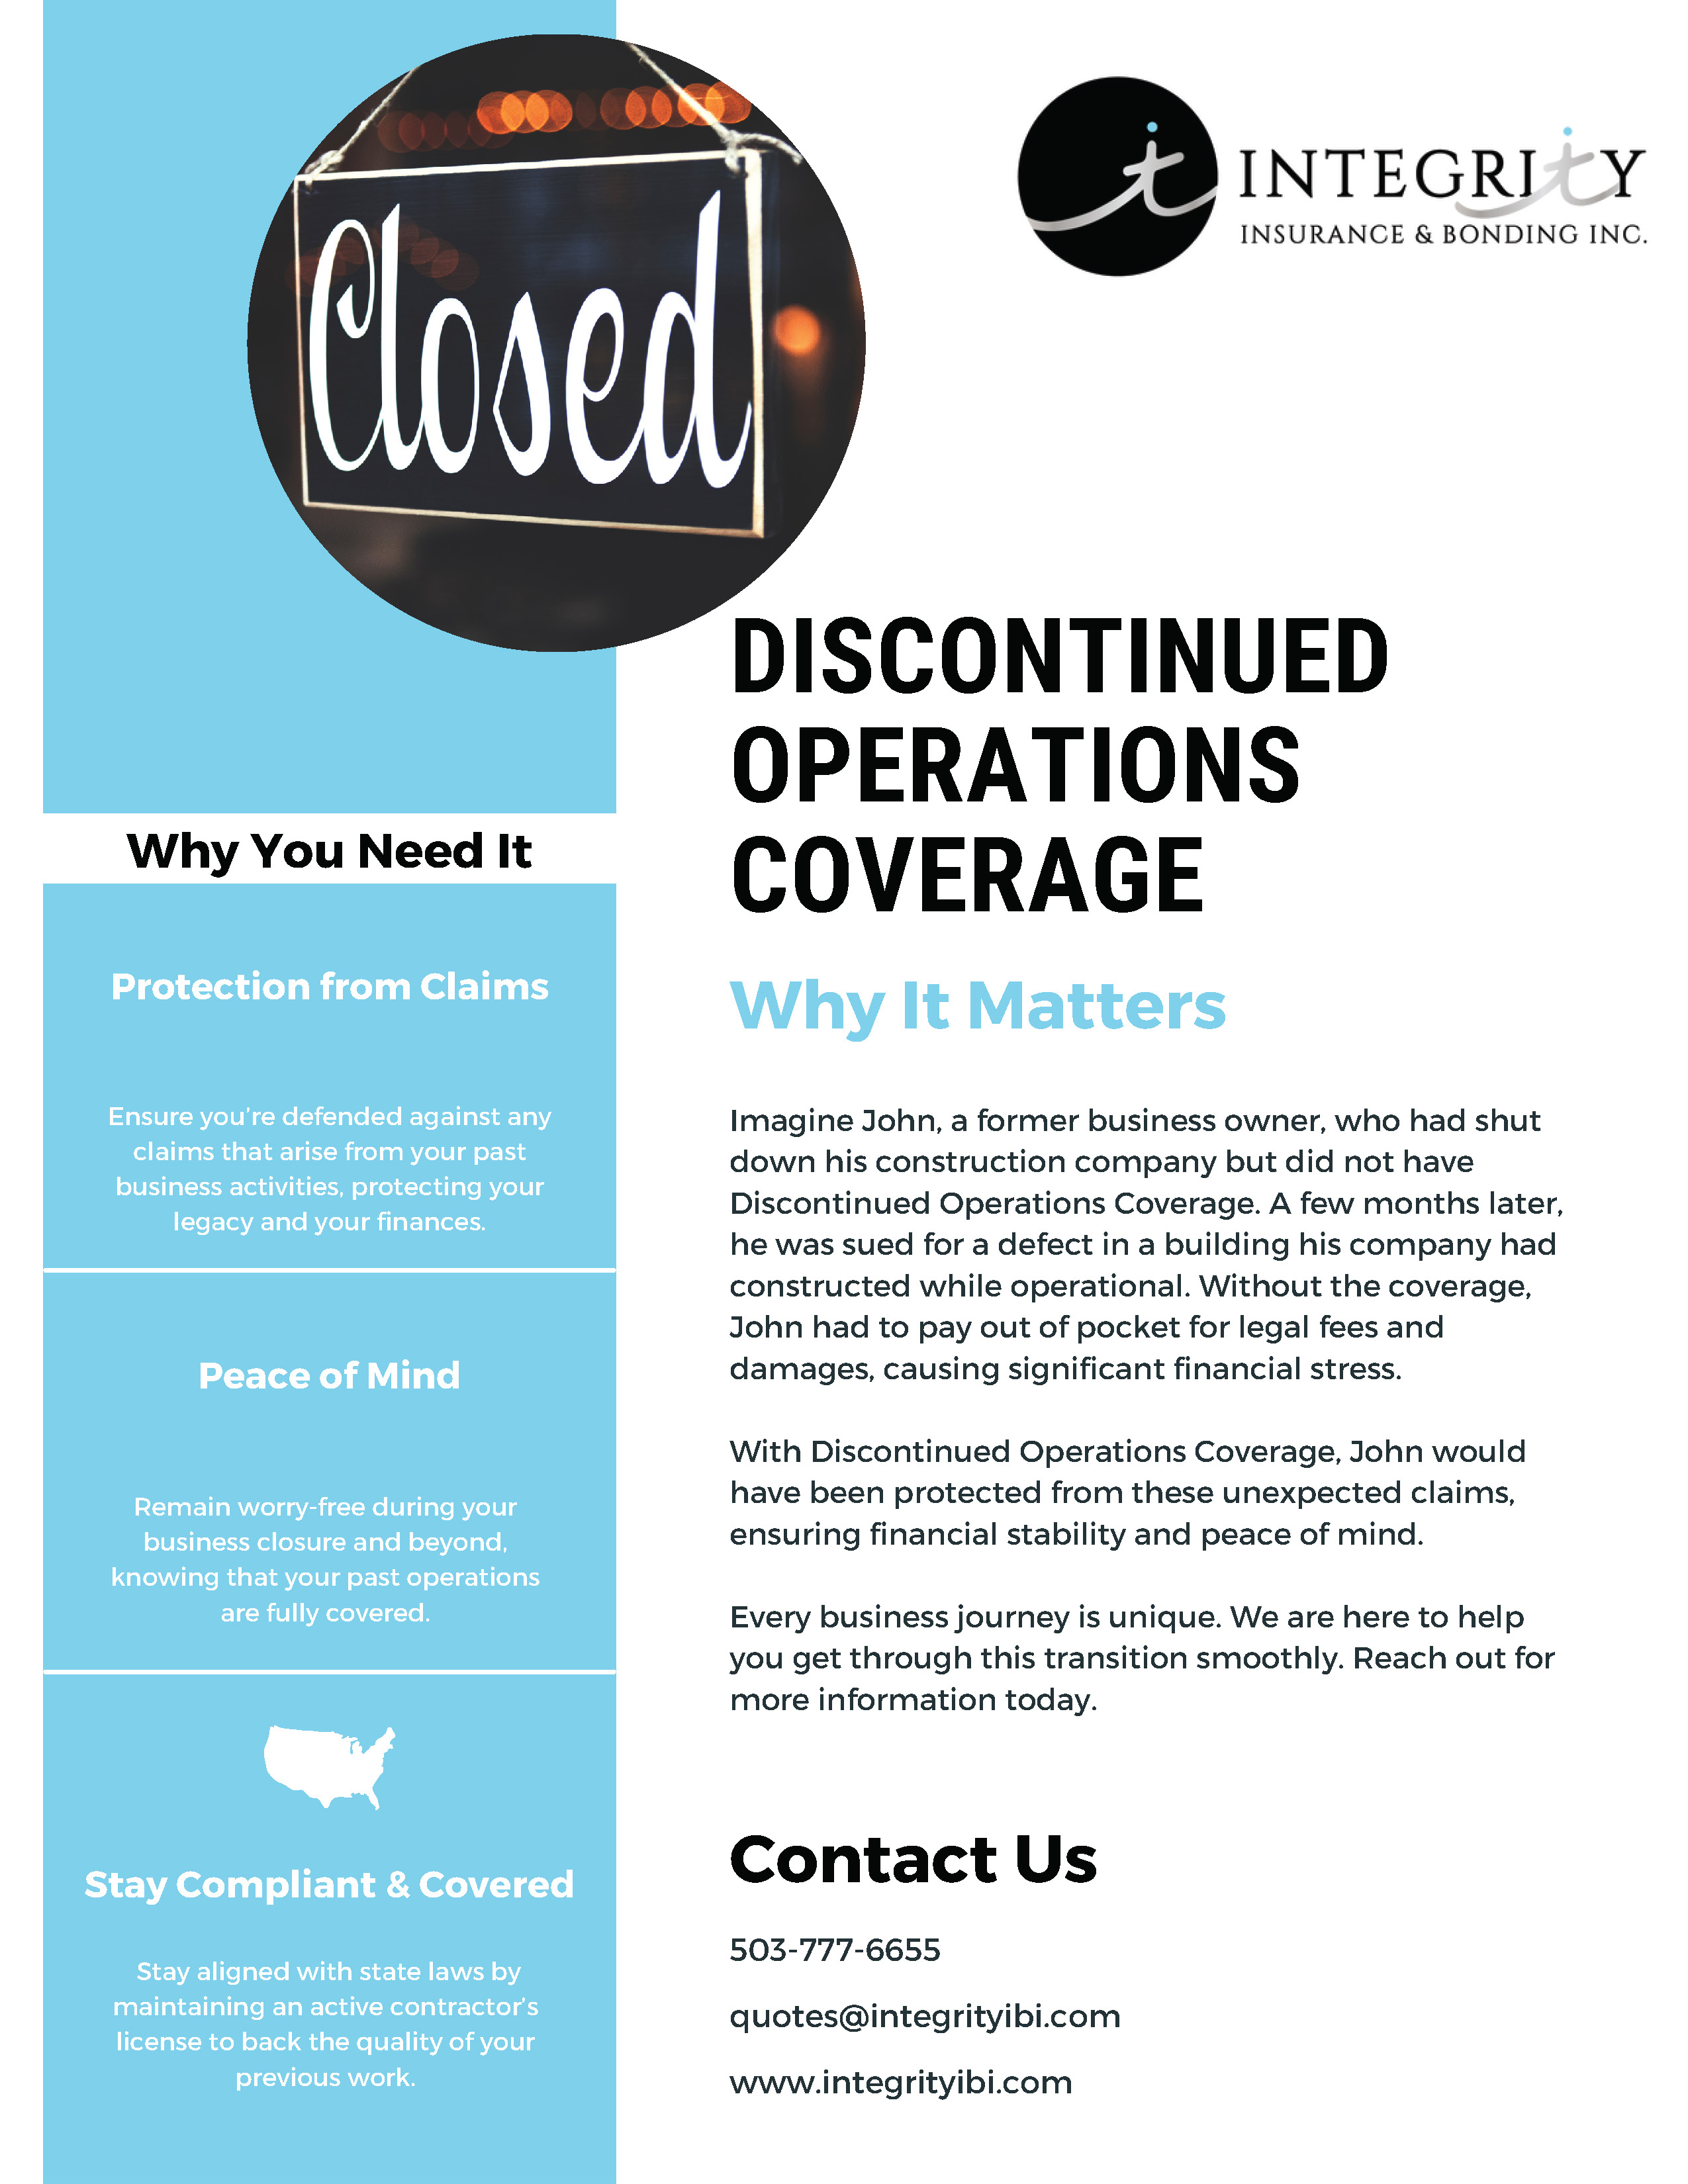 Integrity Insurance & Bonding - The Importance of Discontinued Operations Coverage for Roofing Contractors